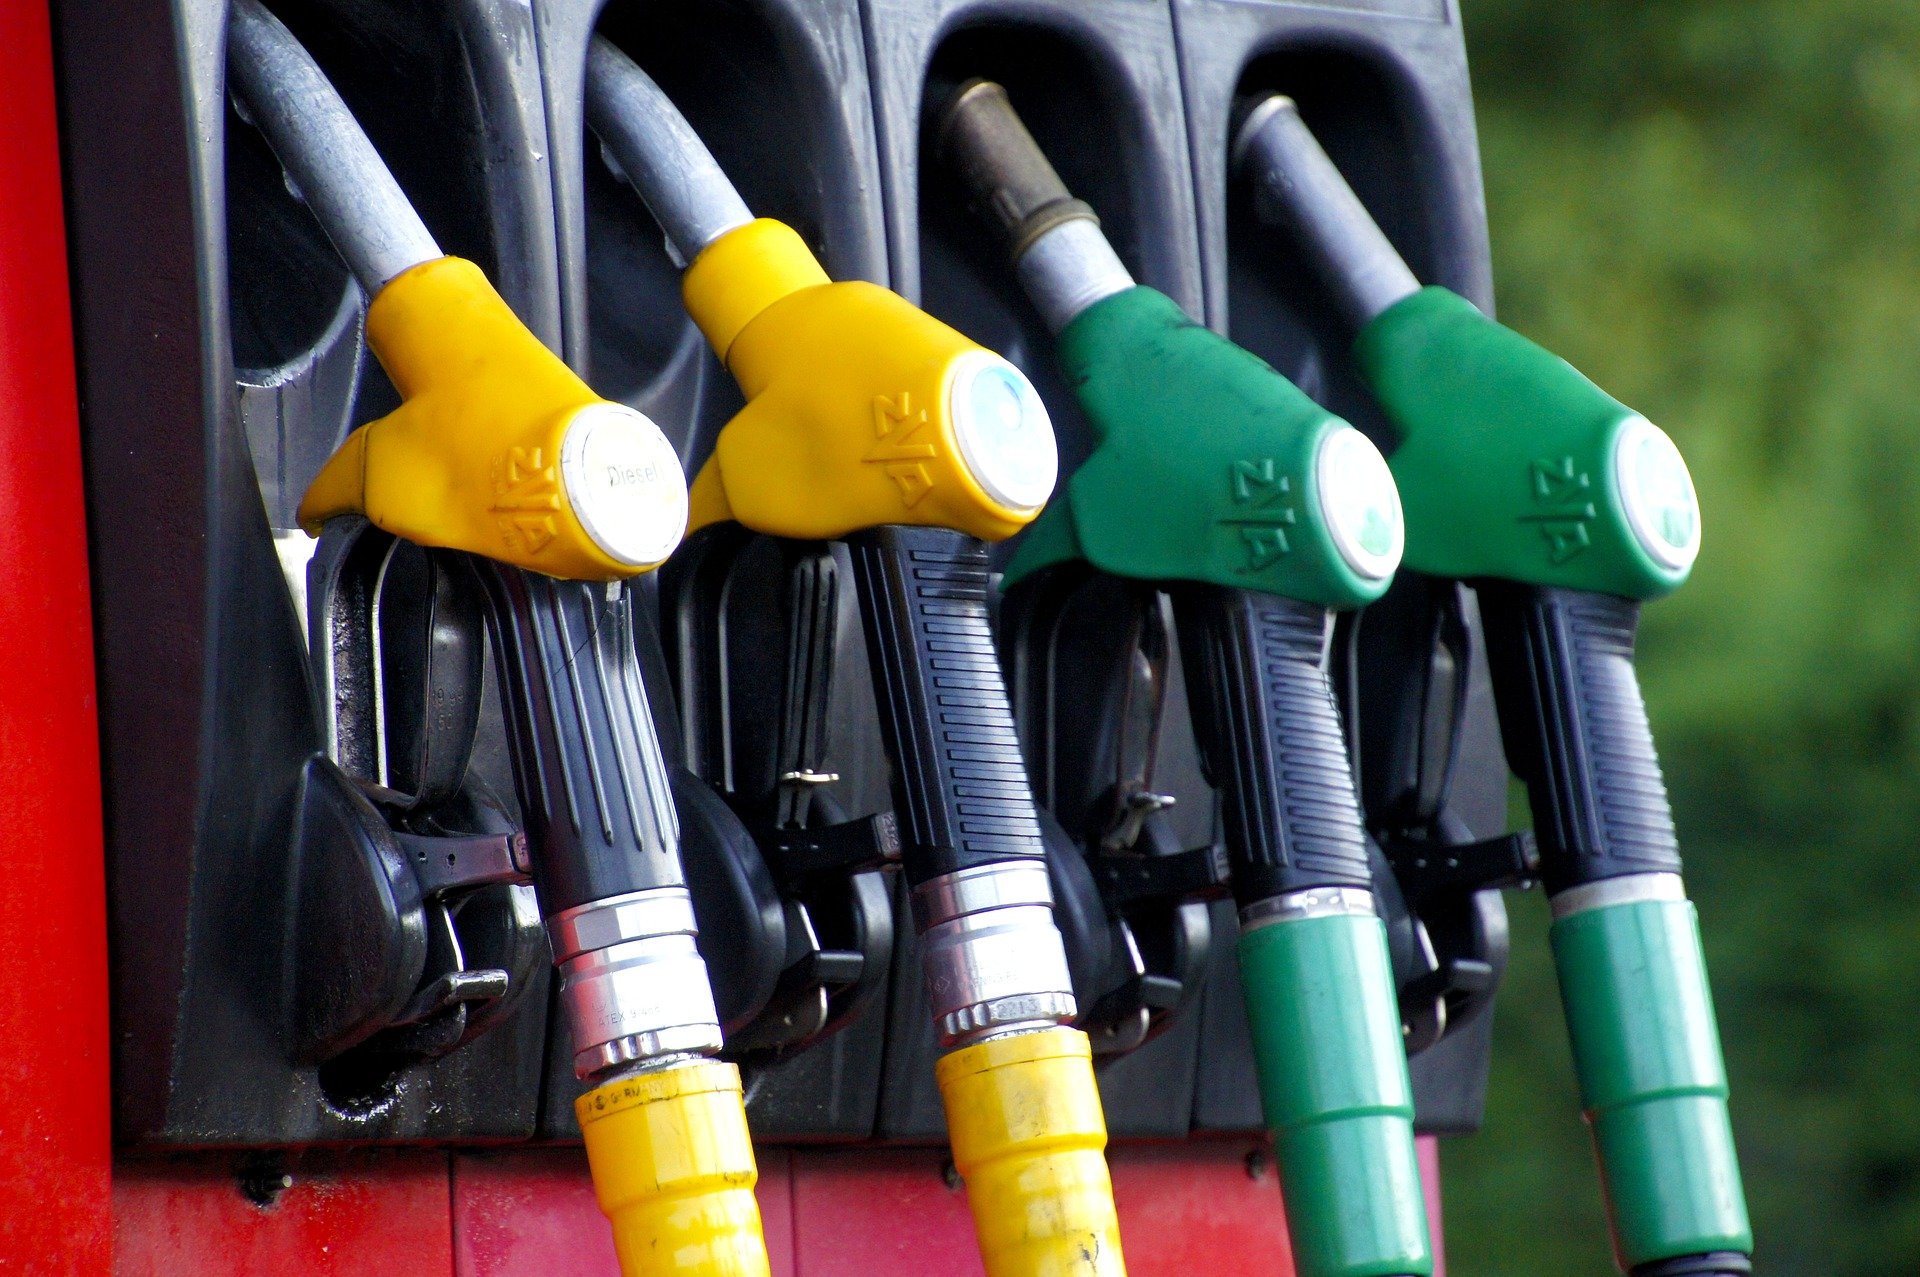 Fuel Cards UK: What are the benefits?